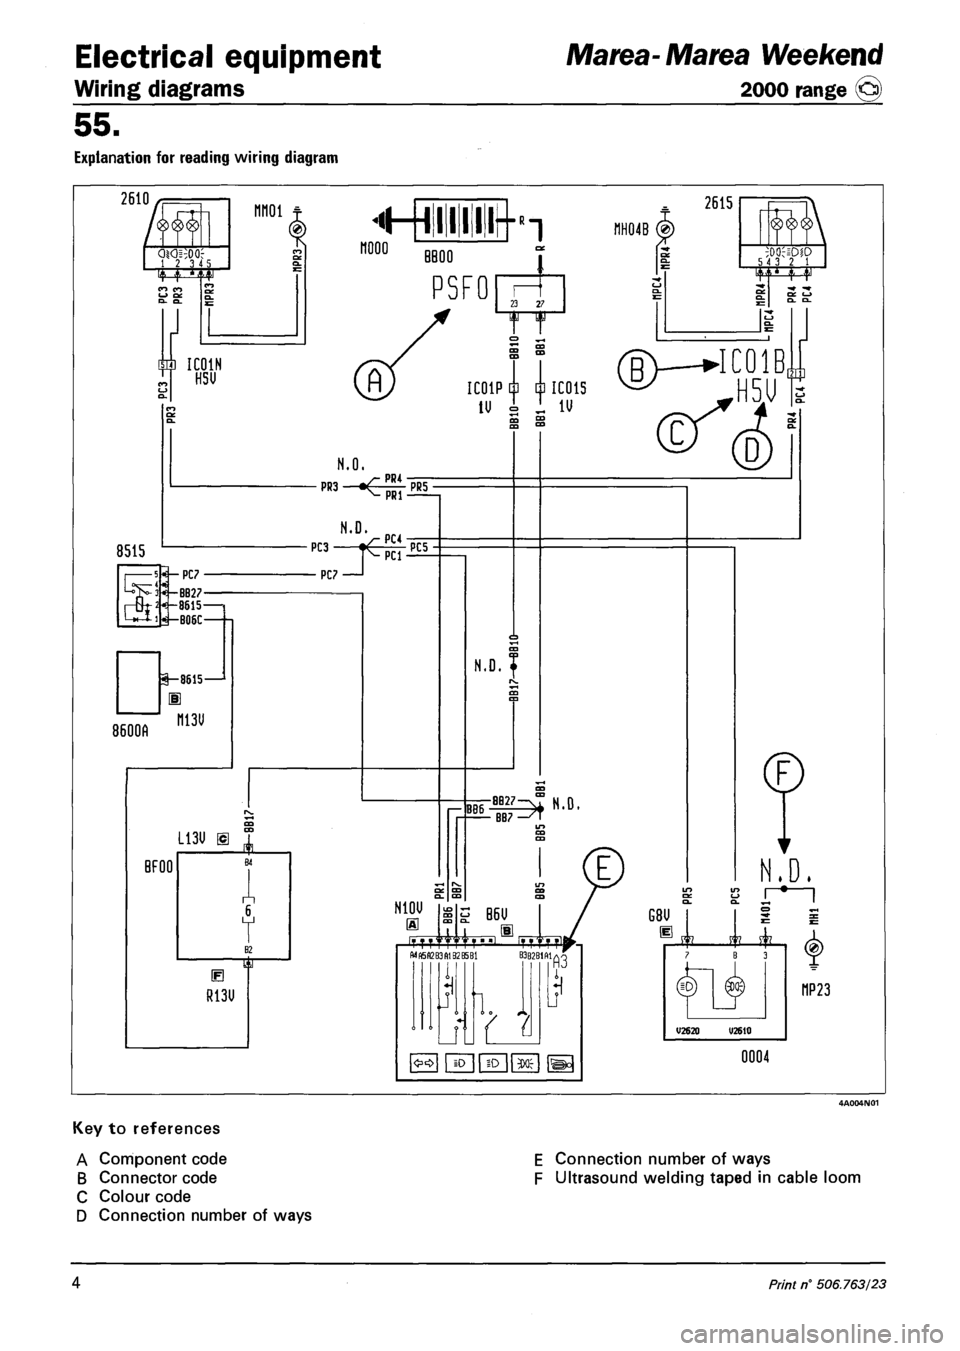 FIAT MAREA 2001 1.G Owners Manual Electrical equipment 
Wiring diagrams 
Marea- Marea Weekend 
2000 range © 
55. 
EXPLANATION FOR READING WIRING DIAGRAM 
2610/f=T 
1 2 3 " 
nnoi t 
m IC01H ^ HSU 
8515 
^— PC7 
-BB27 -8615 1 W-B06C-